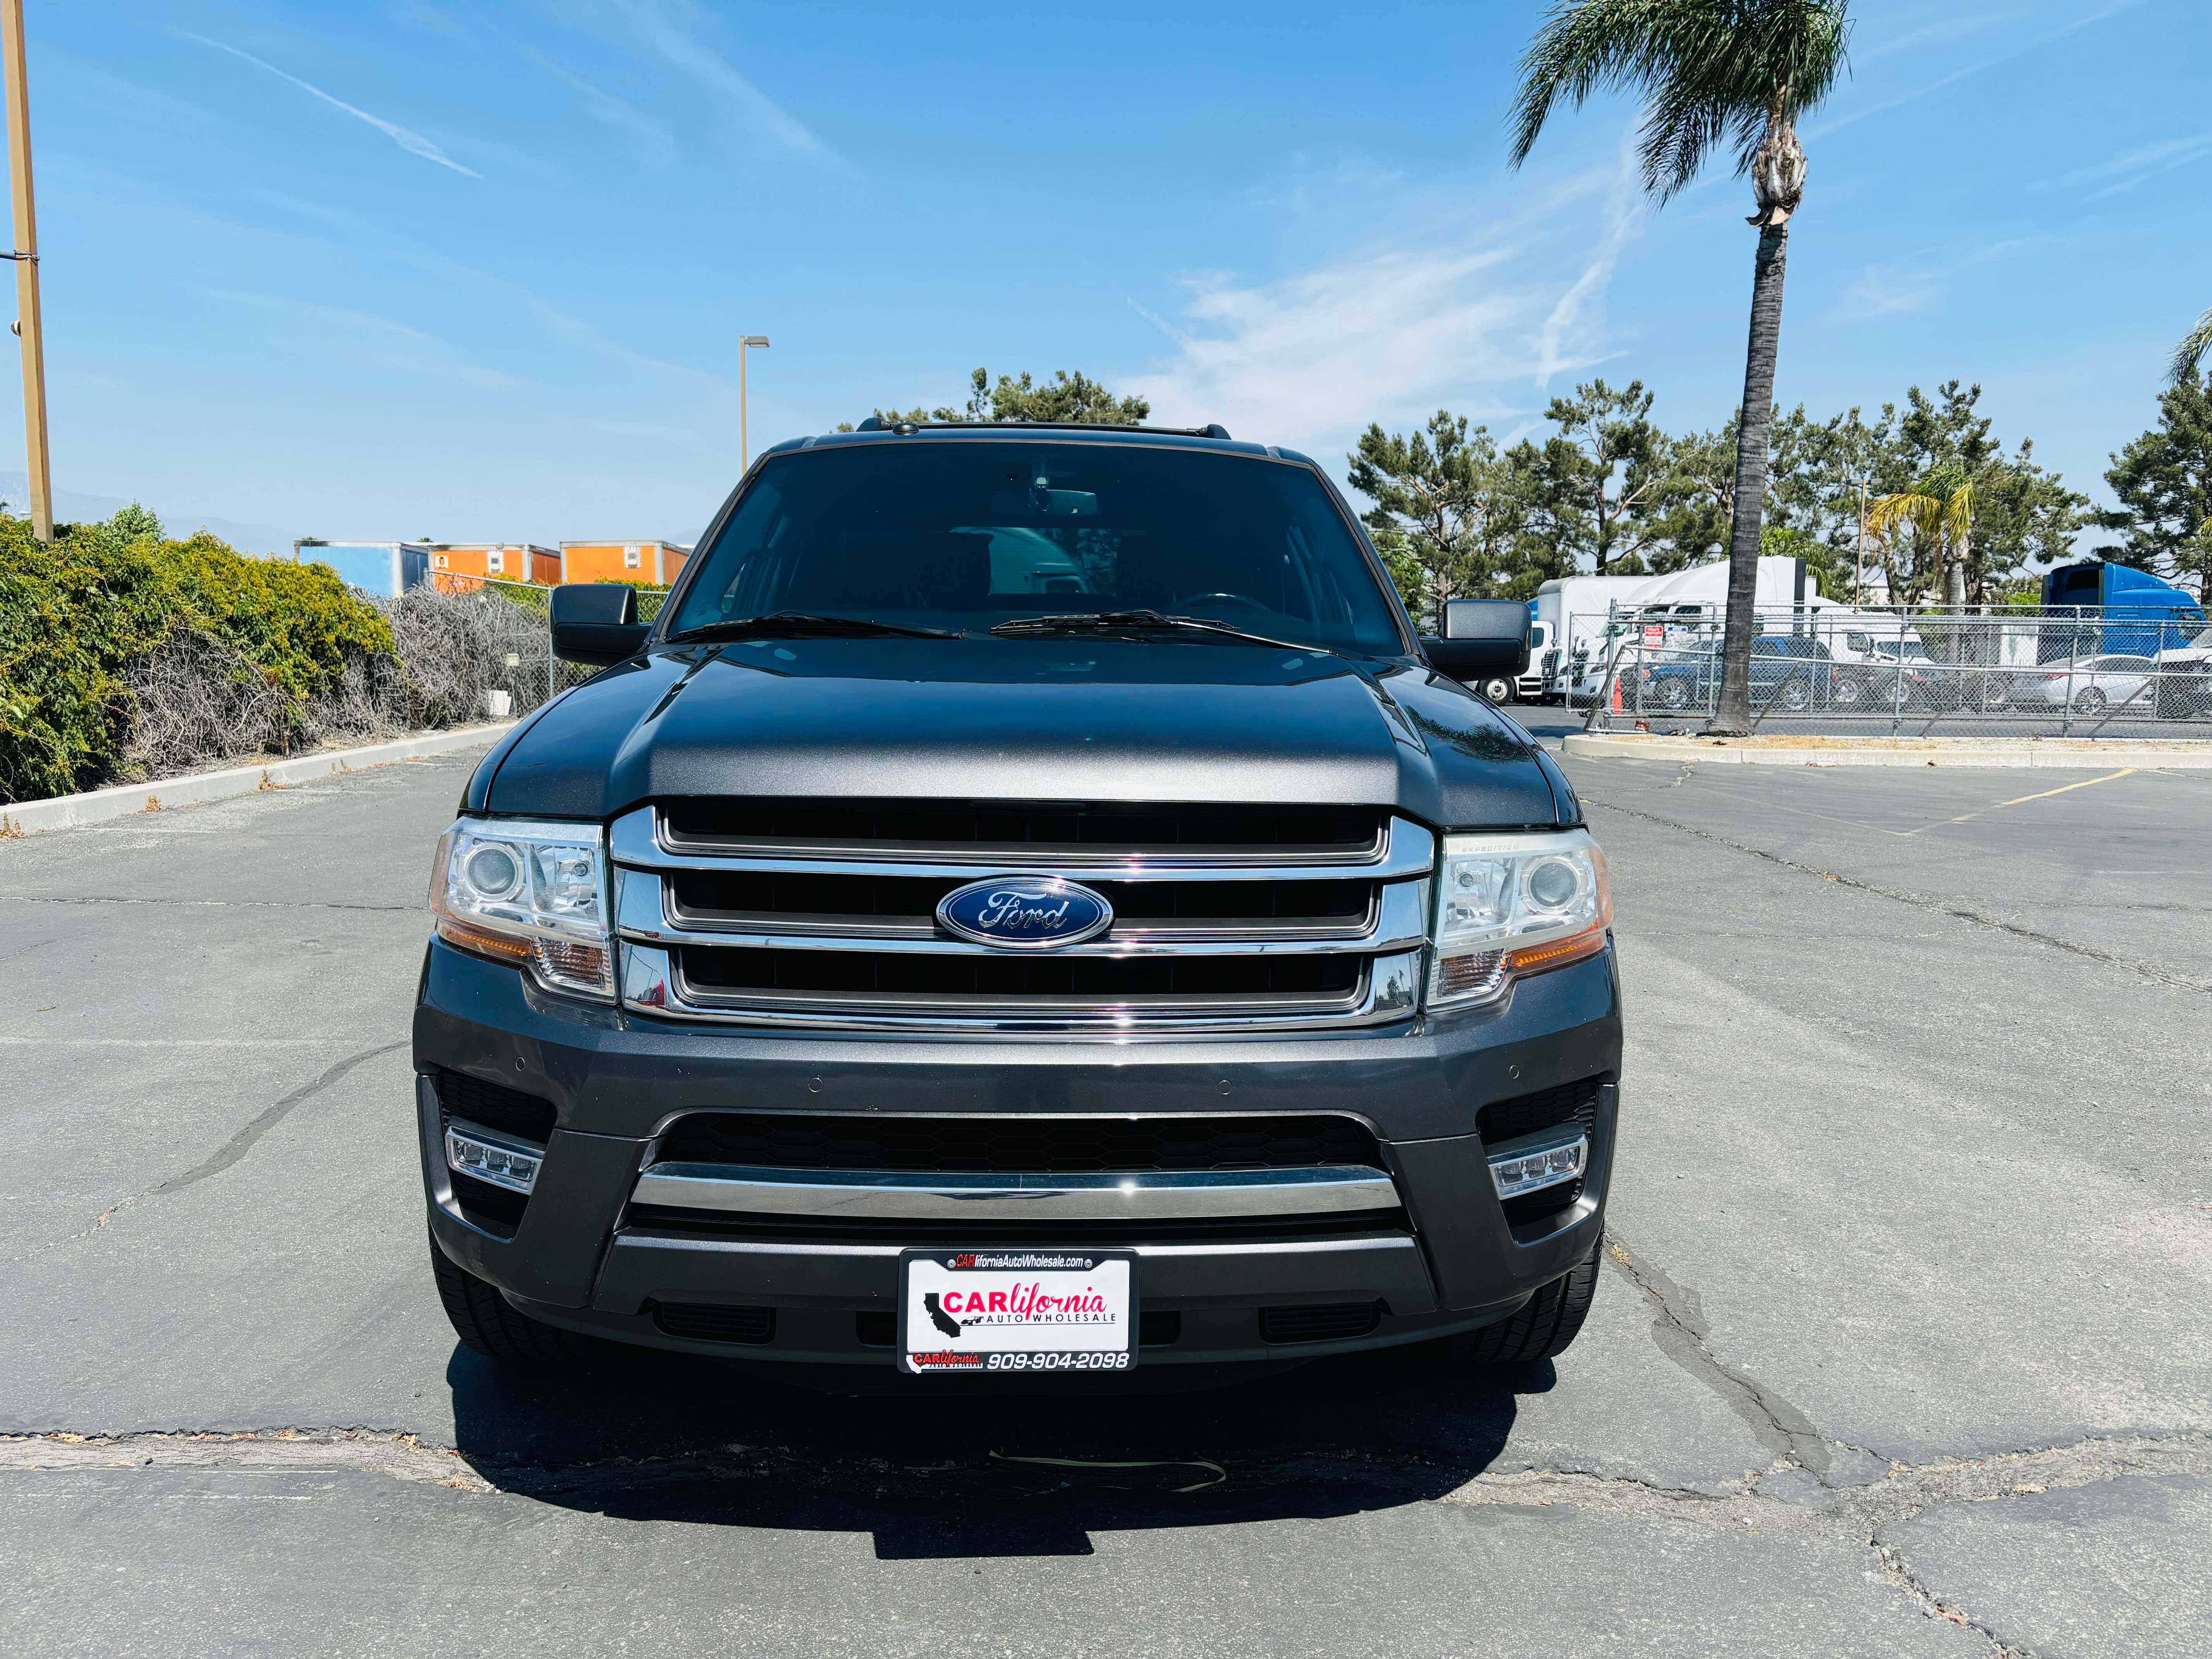 Ford Expedition Image 2